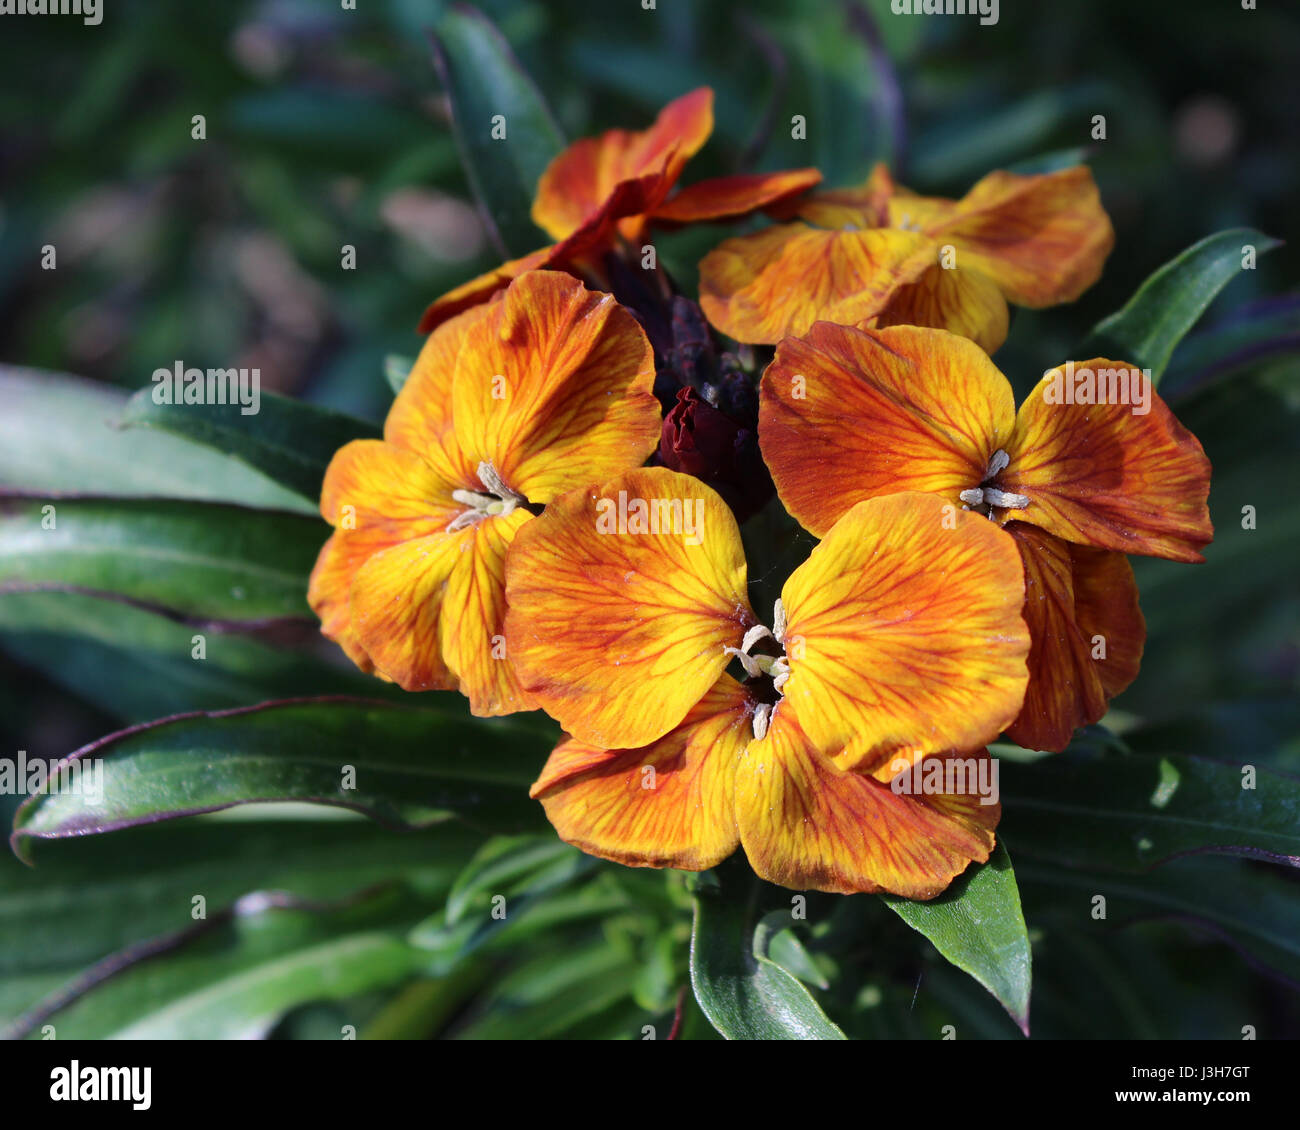 The brightly colored spring flowers of Erysimum cheiri (Cheiranthus) also known as the Wallflower. Stock Photo